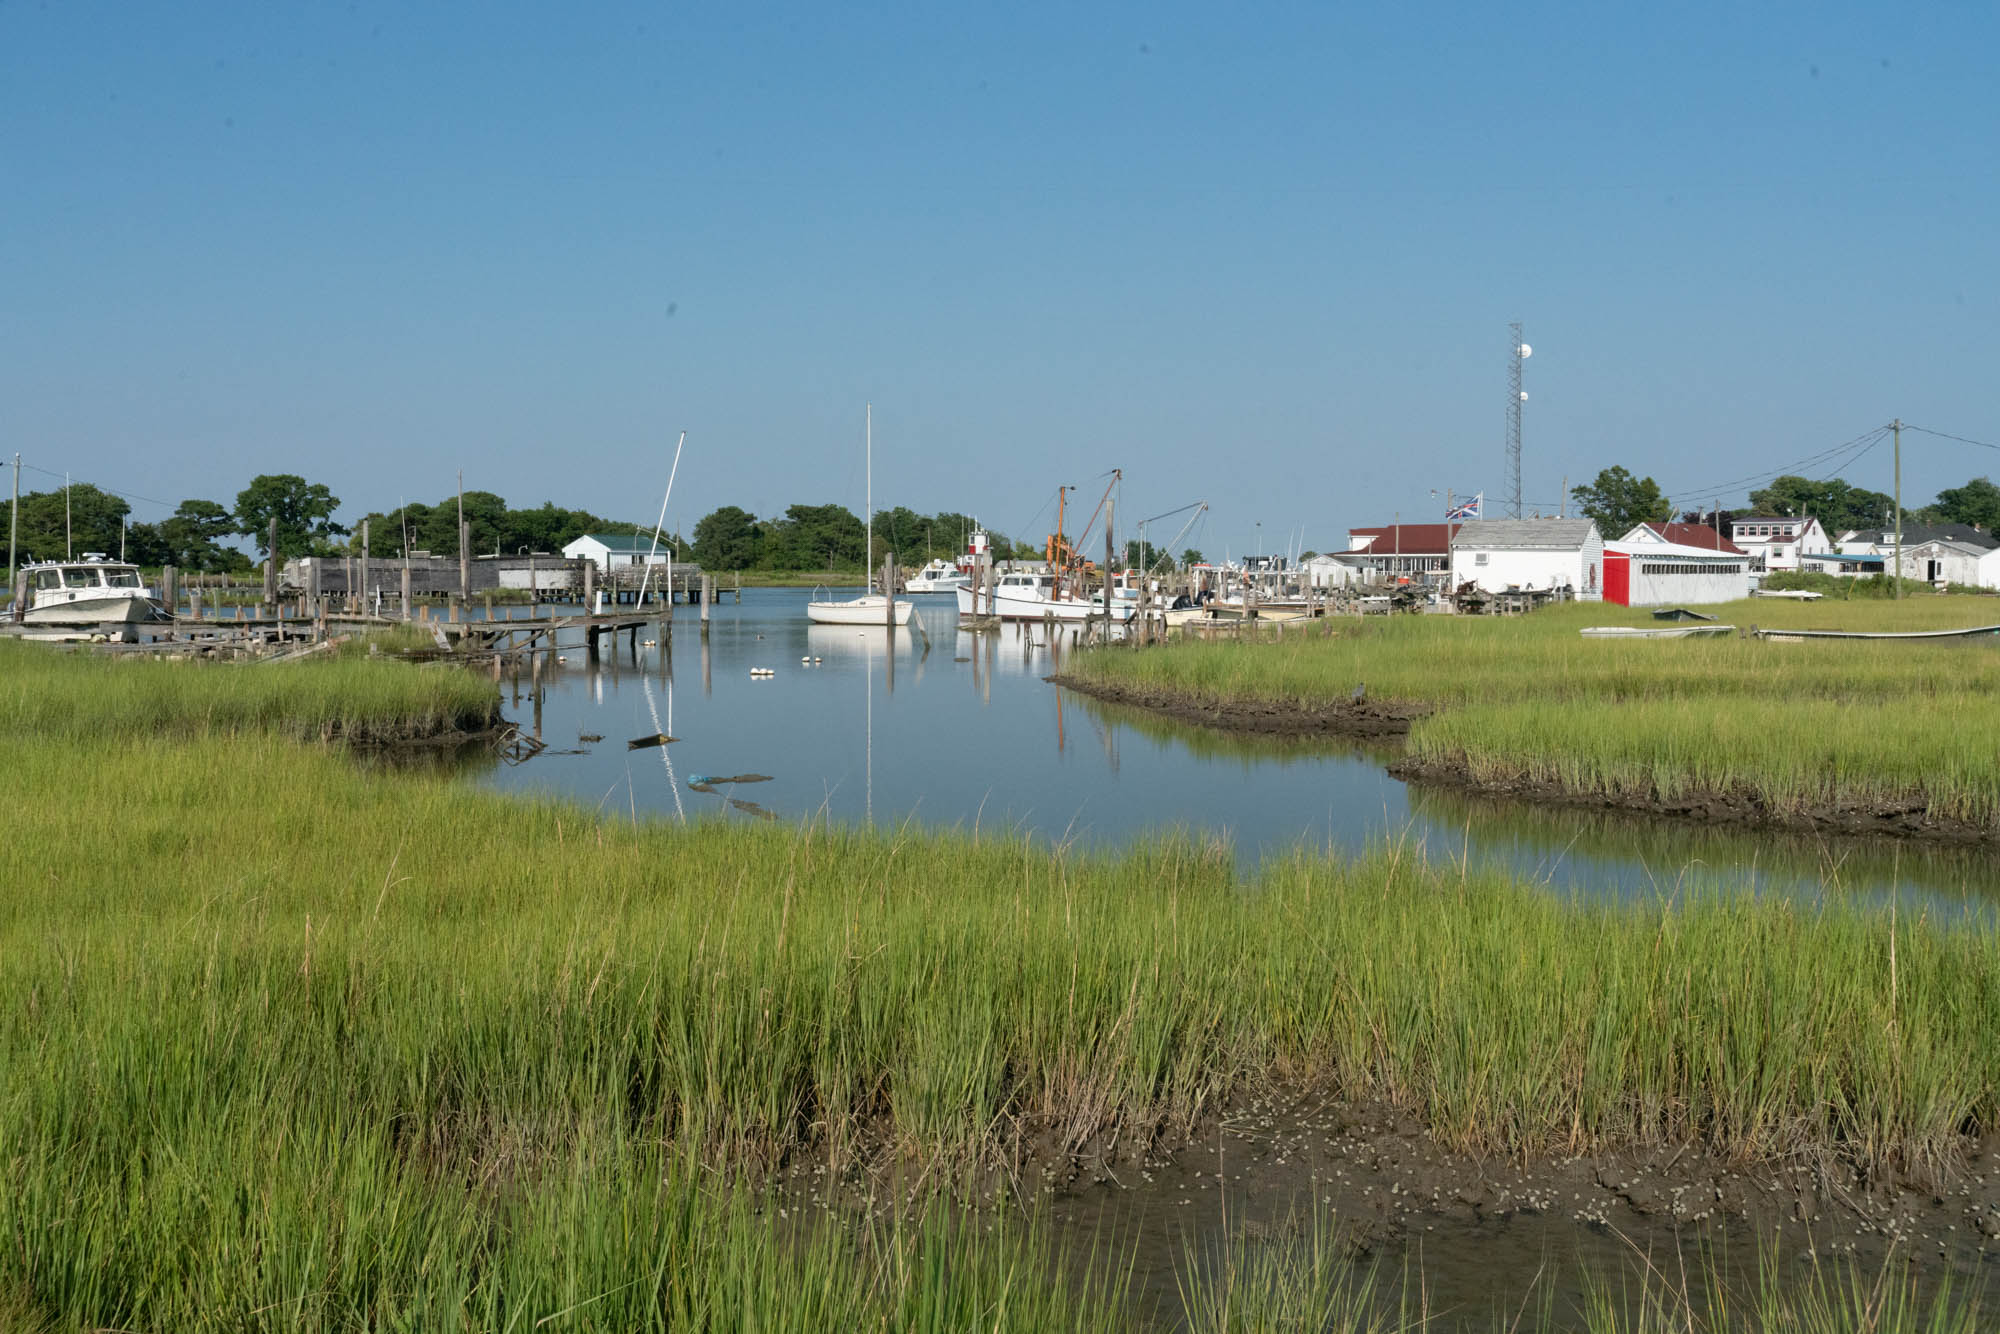 Scientists report that about a dozen communities on Maryland’s Eastern Shore, including  Smith Island and Crisfield, already are coping with disruptive flooding. (Jordan Laird/News21)